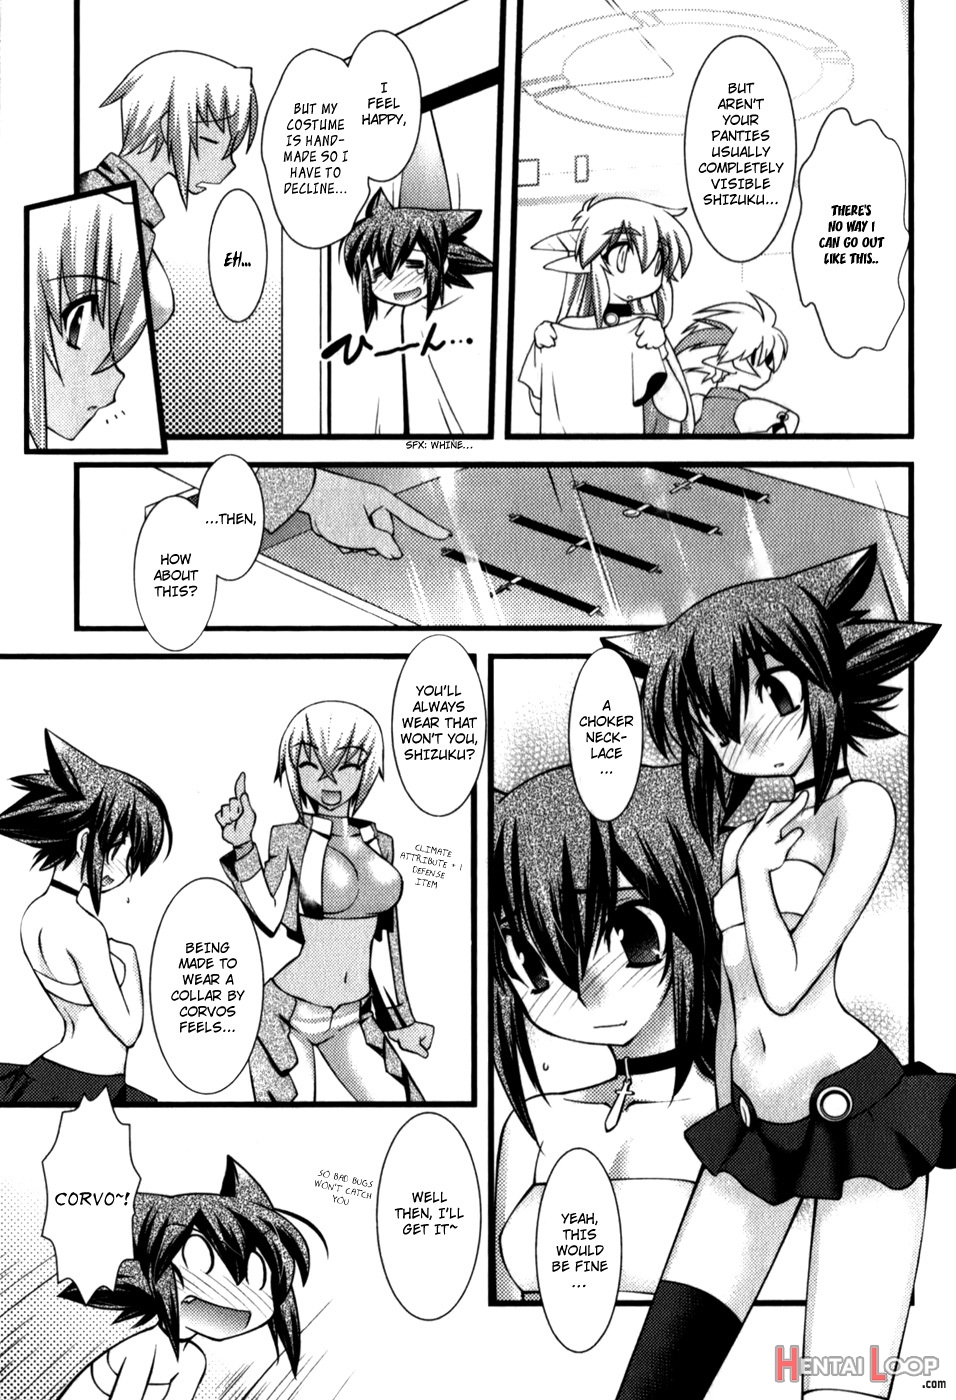 Trans Trans Ch. 3 page 5